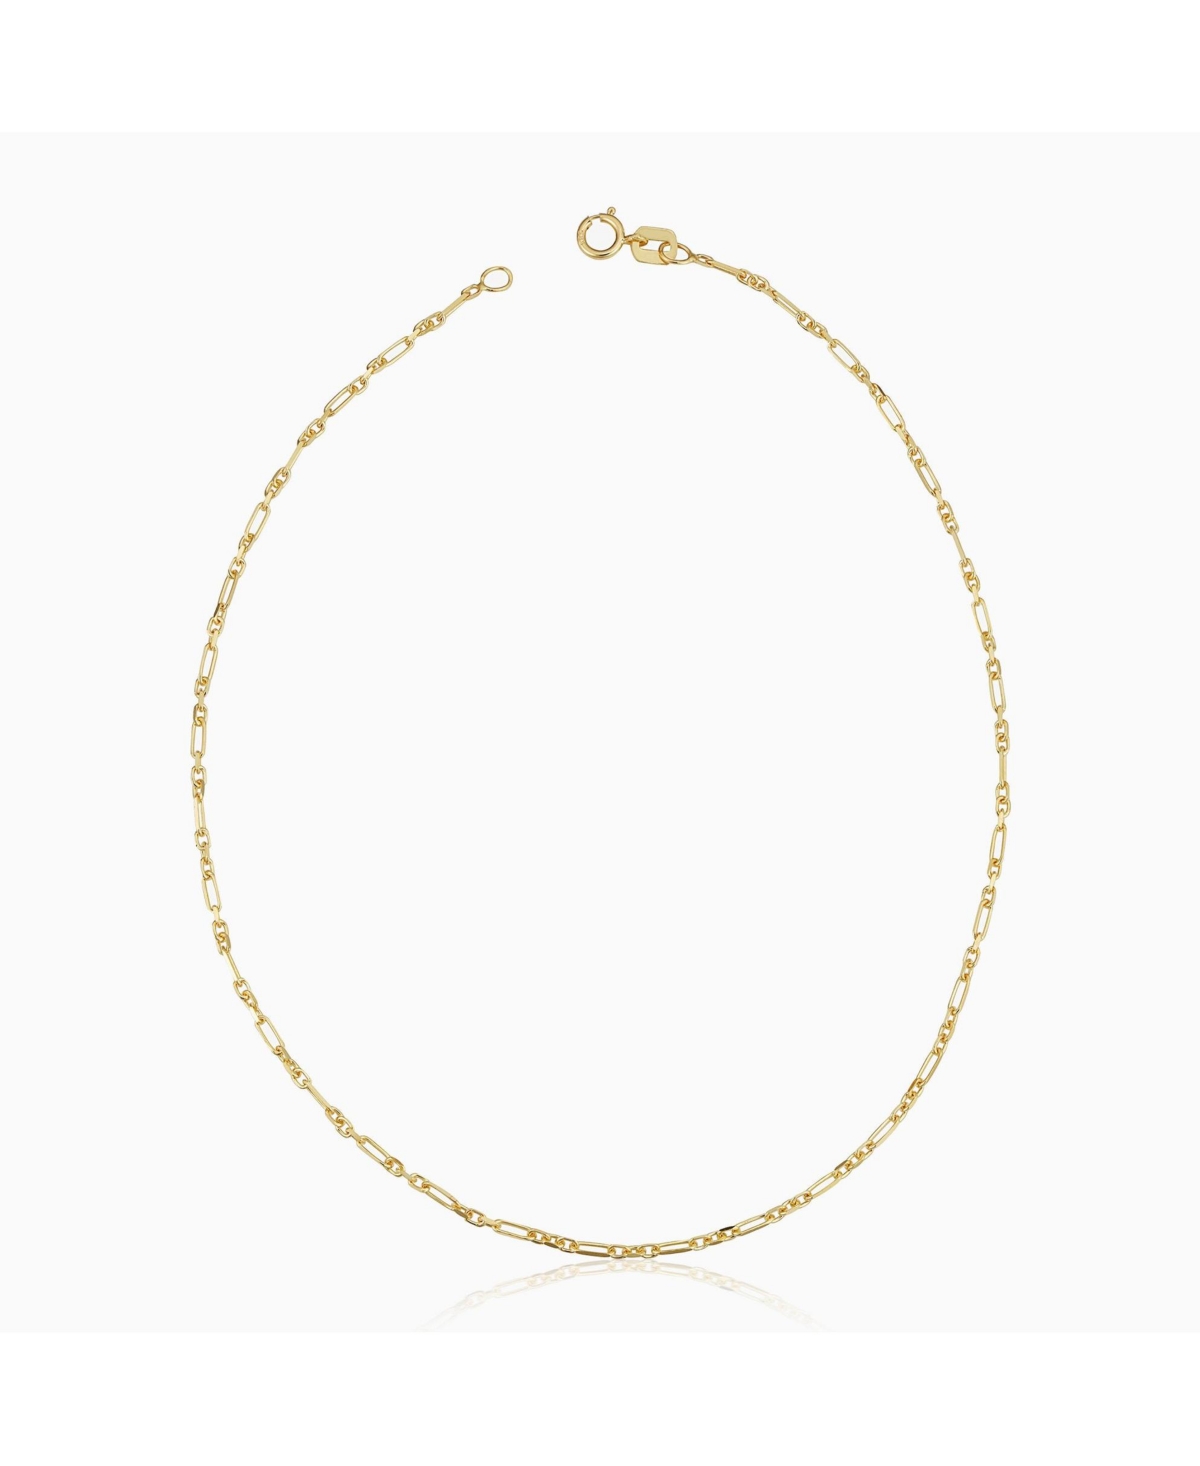 ORADINA ALL YOU NEED ANKLET IN 14K YELLOW GOLD